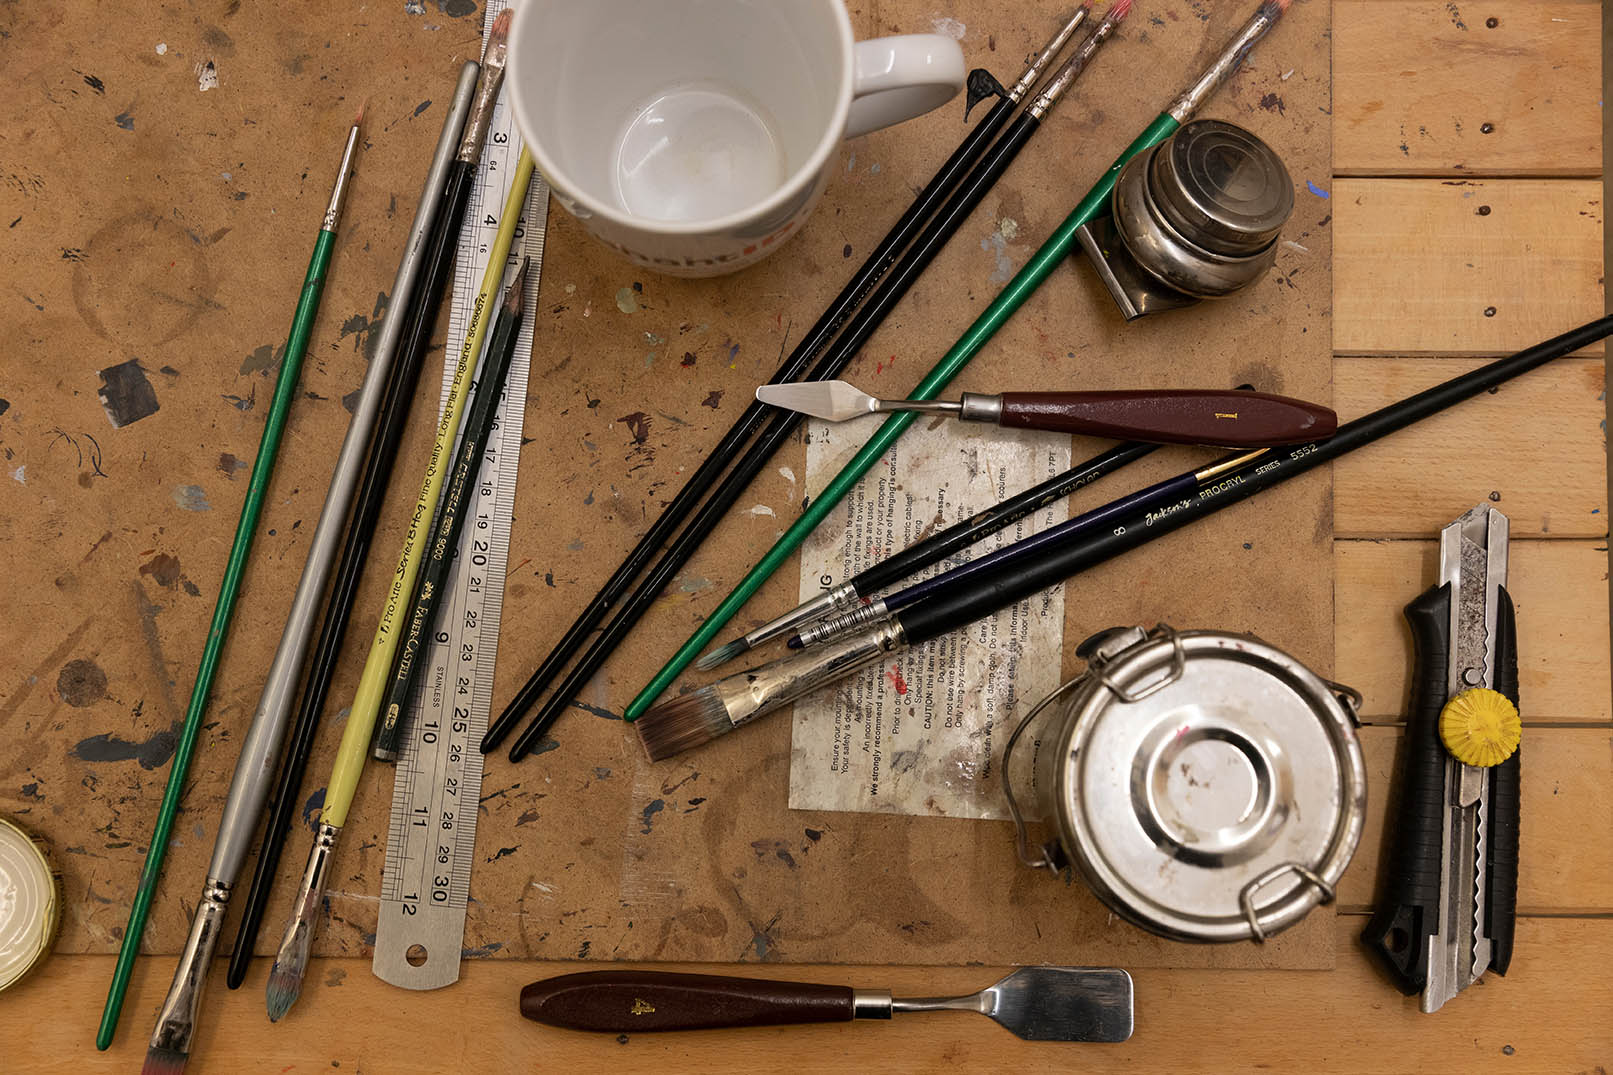 Table of painting tools from above